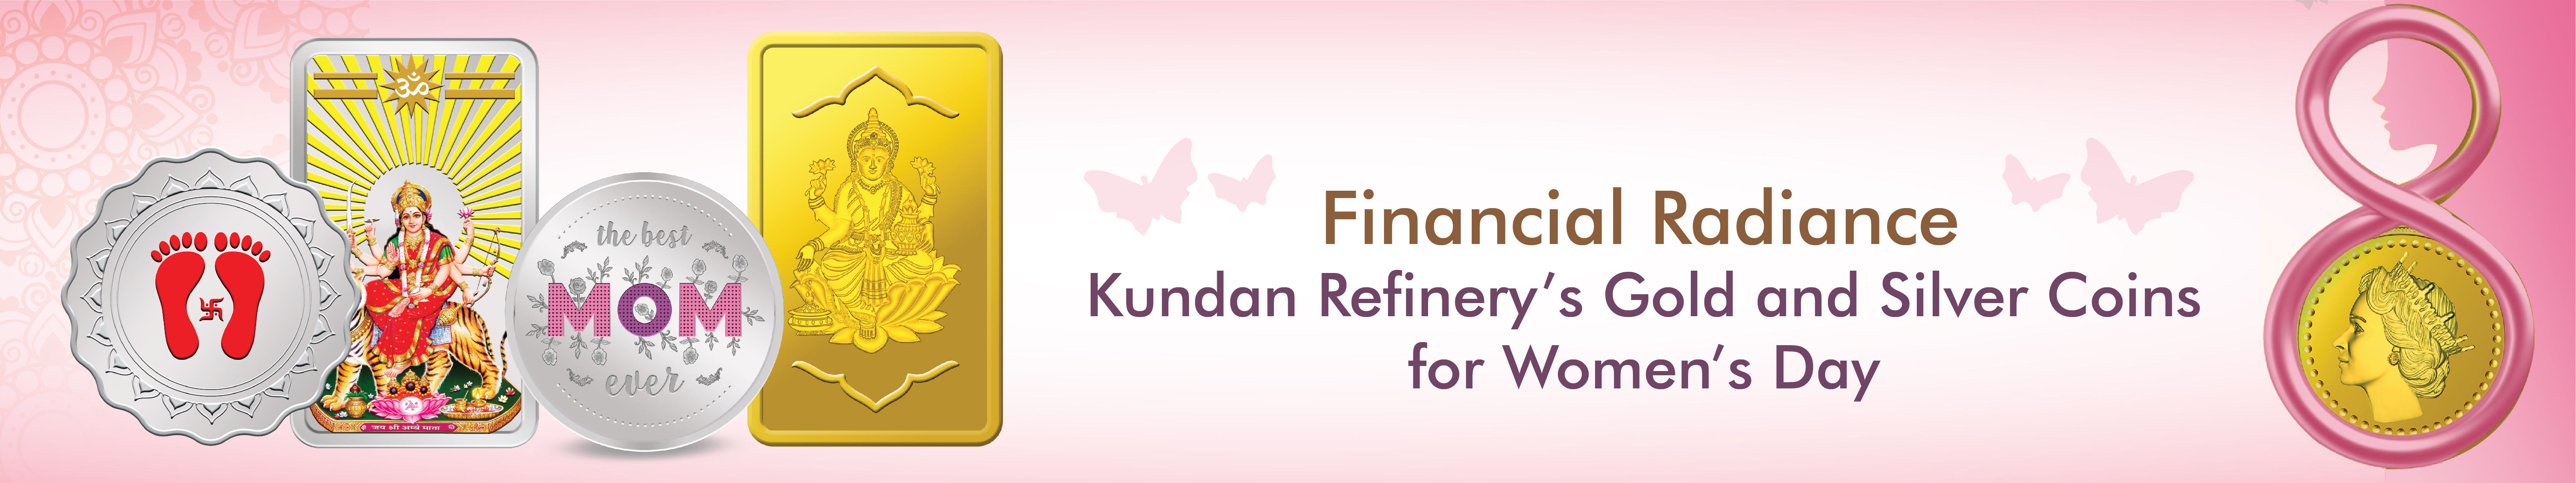 Kundan Refinery’s Gold and Silver Coins for Women’s Day